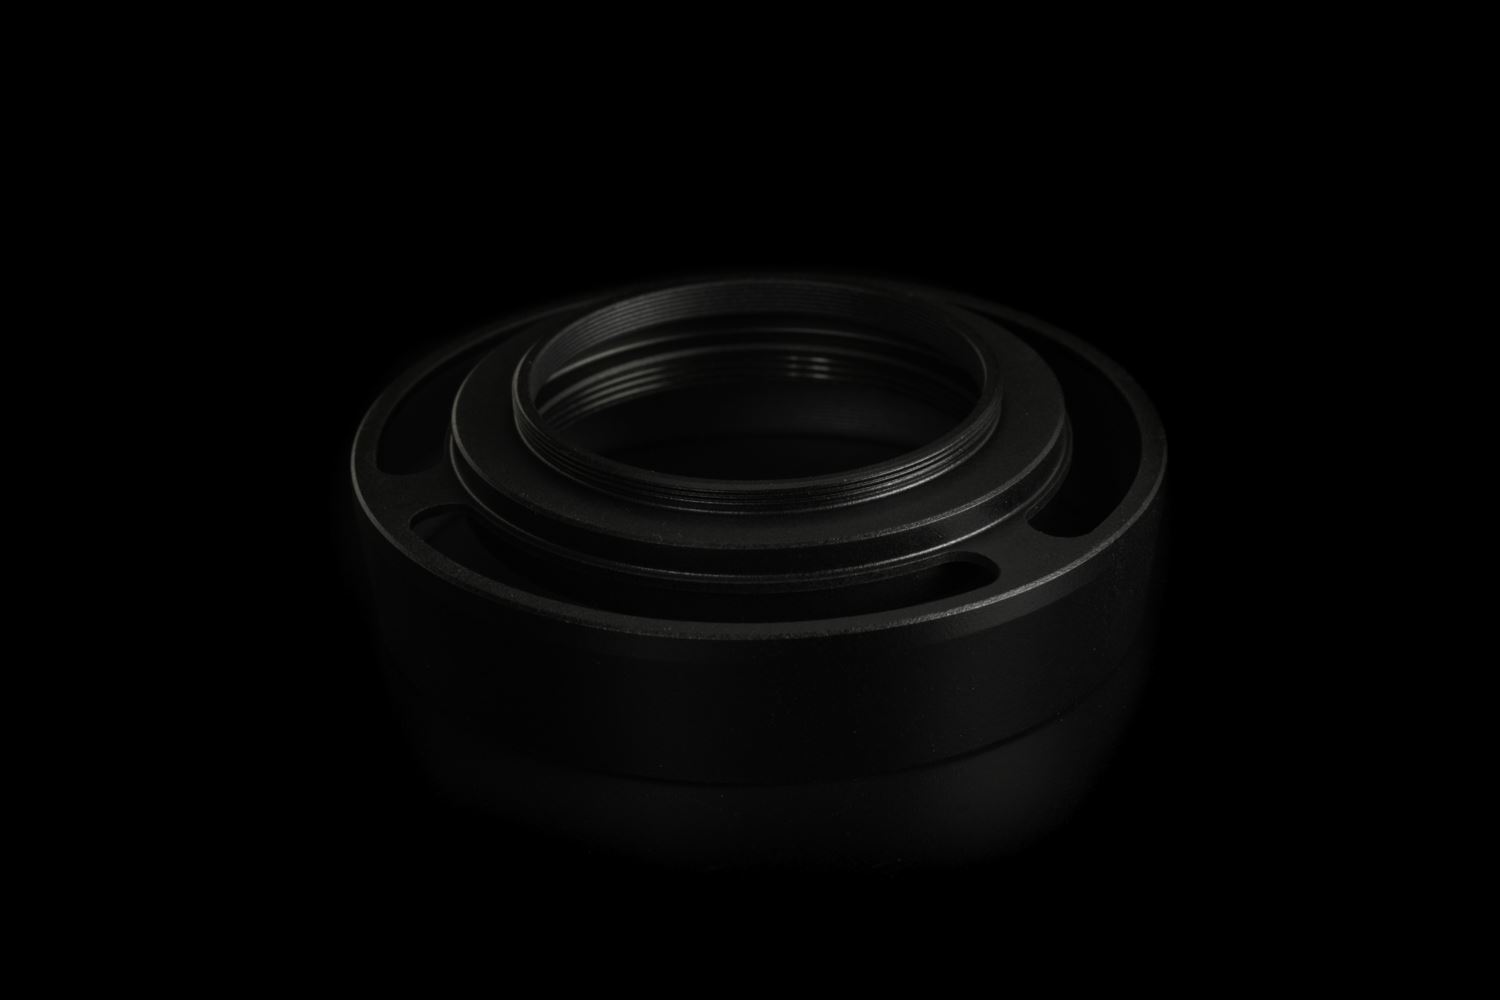 Picture of Black Ventilated Lens Hood made for Leica E39 lenses